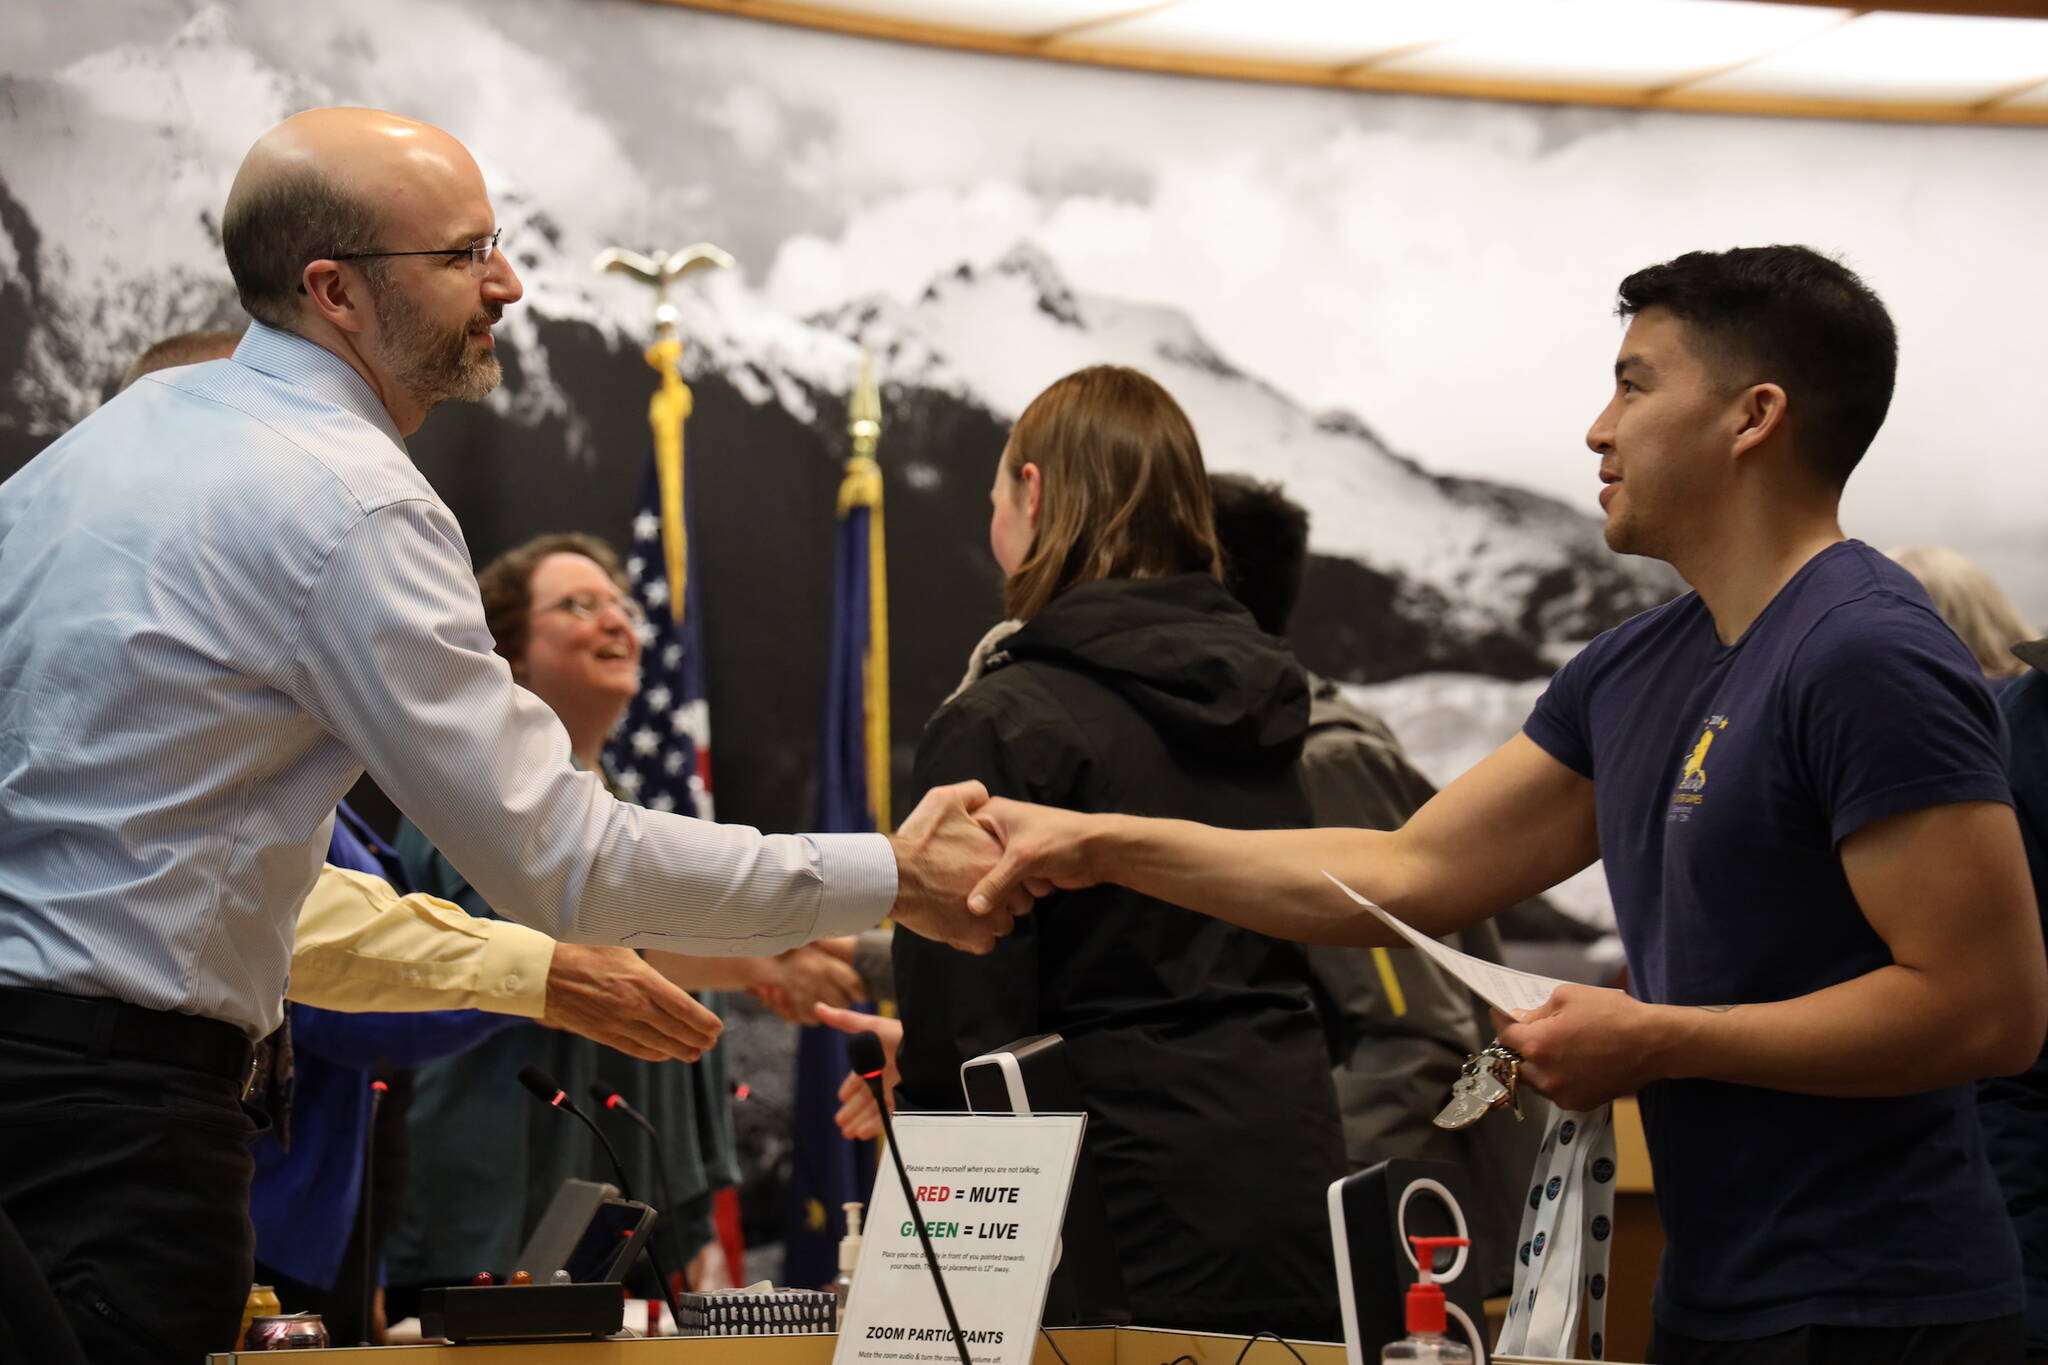 Kyle Khaayák’w Worl, an athlete and coach for Team Alaska at the 2023 Arctic Winter Games in February, shakes hands with City and Borough of Juneau Deputy City Manager Robert Barr Monday night. Worl competed in Arctic Sports.